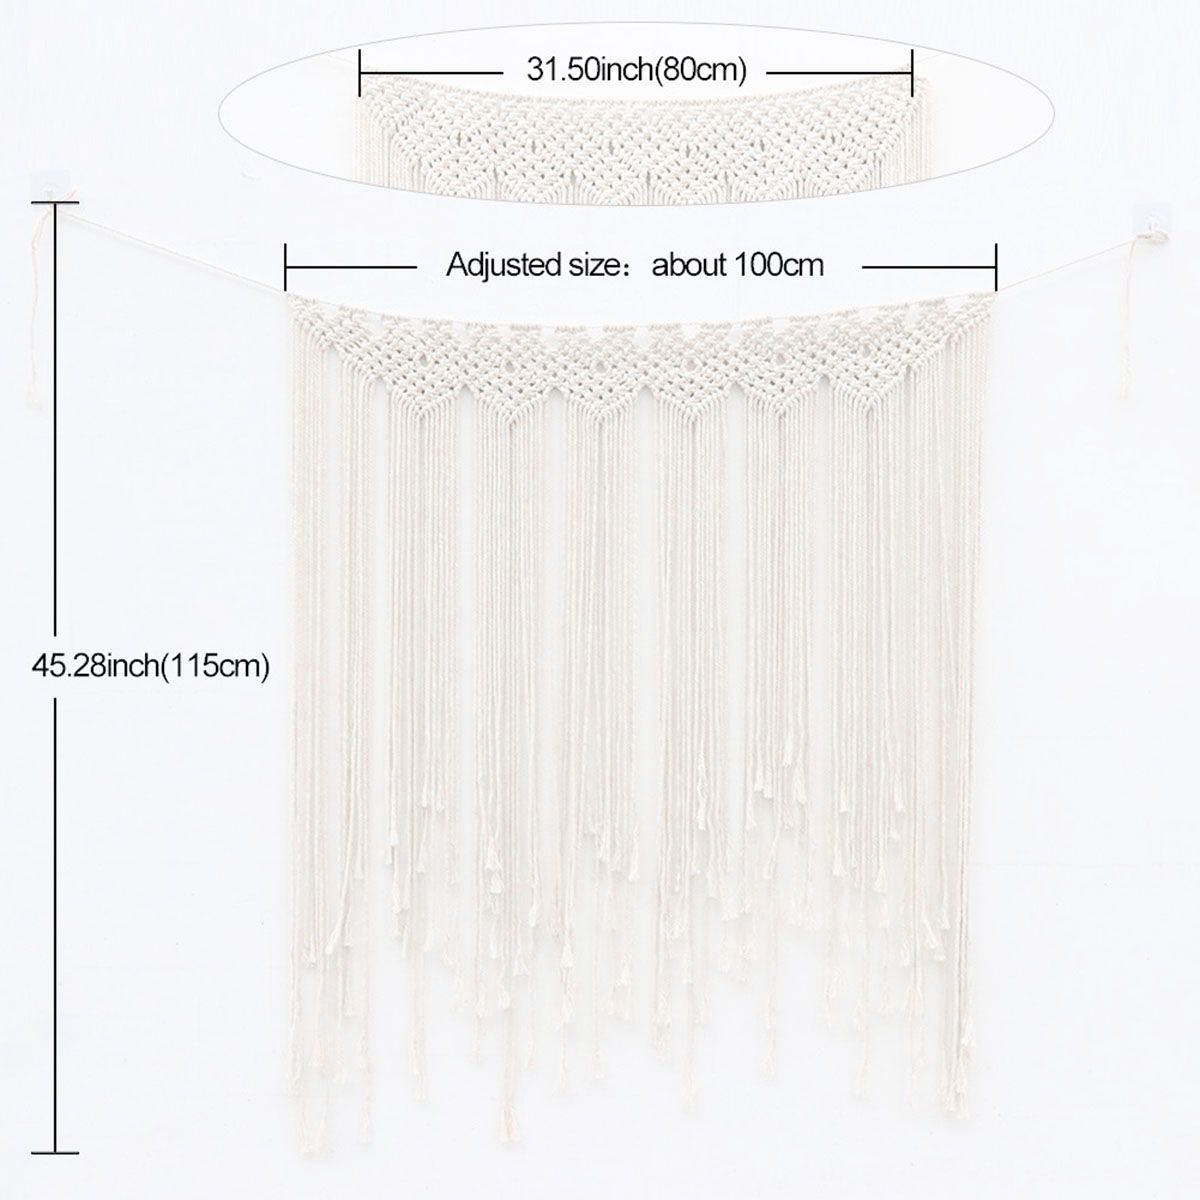 Large-Tassel-Macrame-Wall-Hanging-Tapestry-Home-Room-Handcraft-Cotton-Decoration-1737529